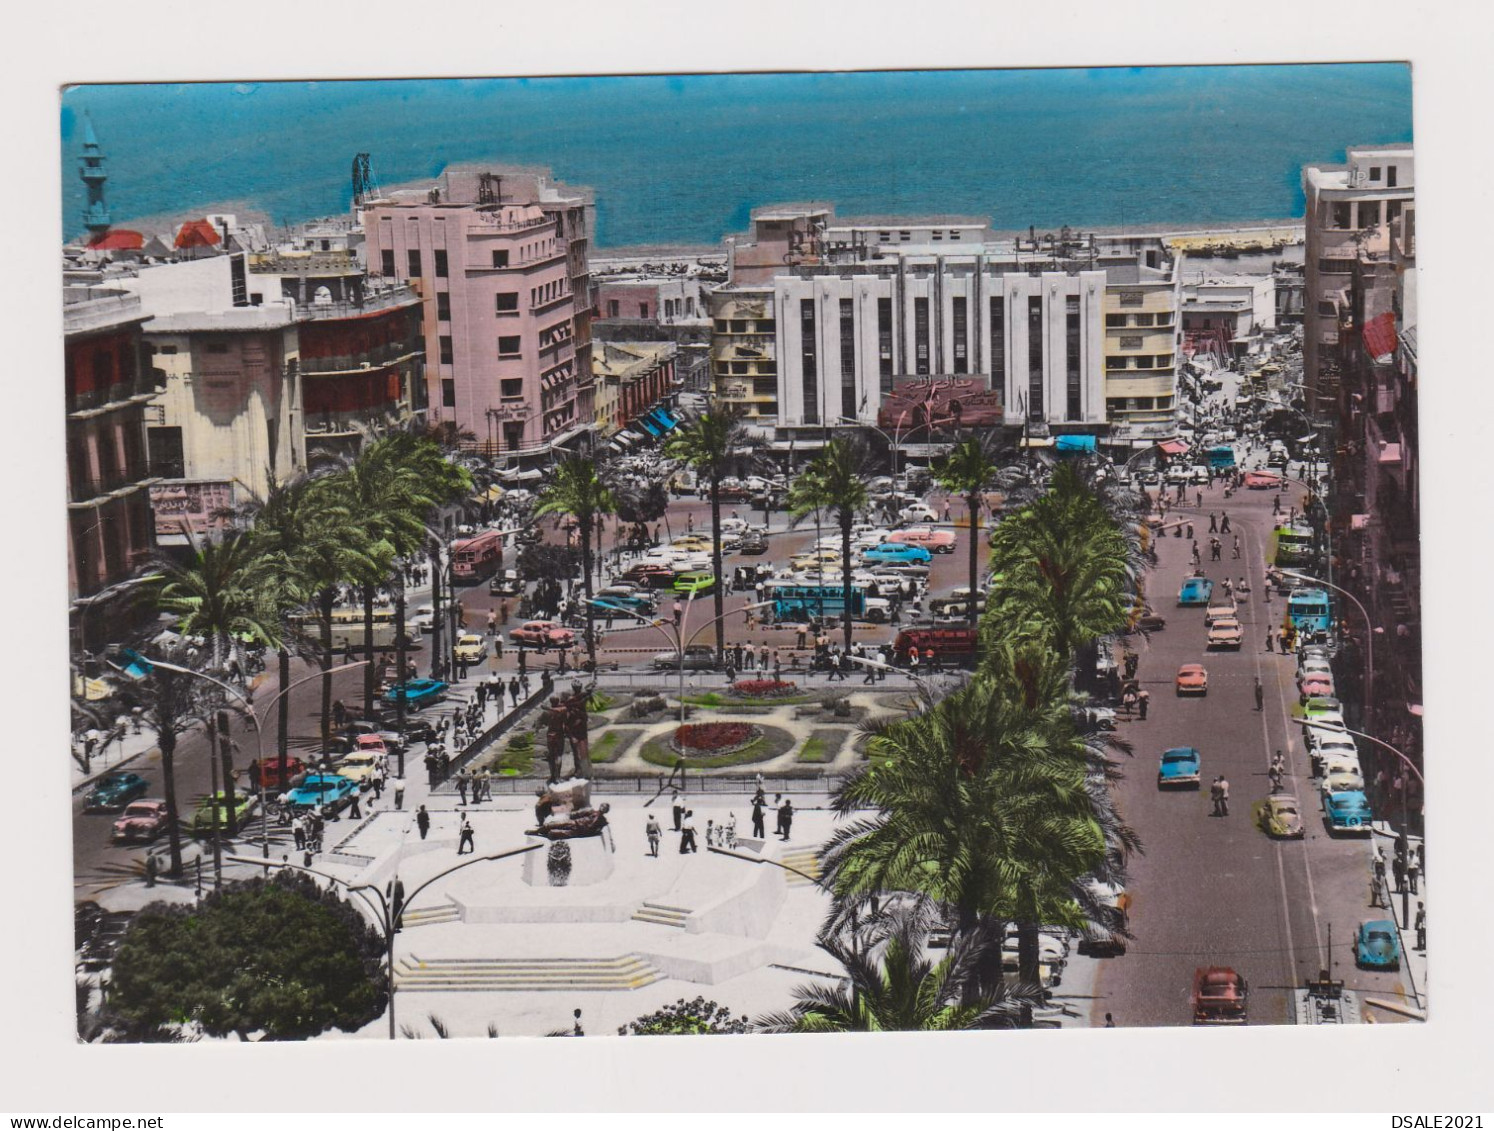 Lebanon Liban BEIRUT MARTYR'S Square, Many Old Car, Vintage Photo Postcard W/Topic Stamp Sent Airmail To Bulgaria /1304 - Líbano